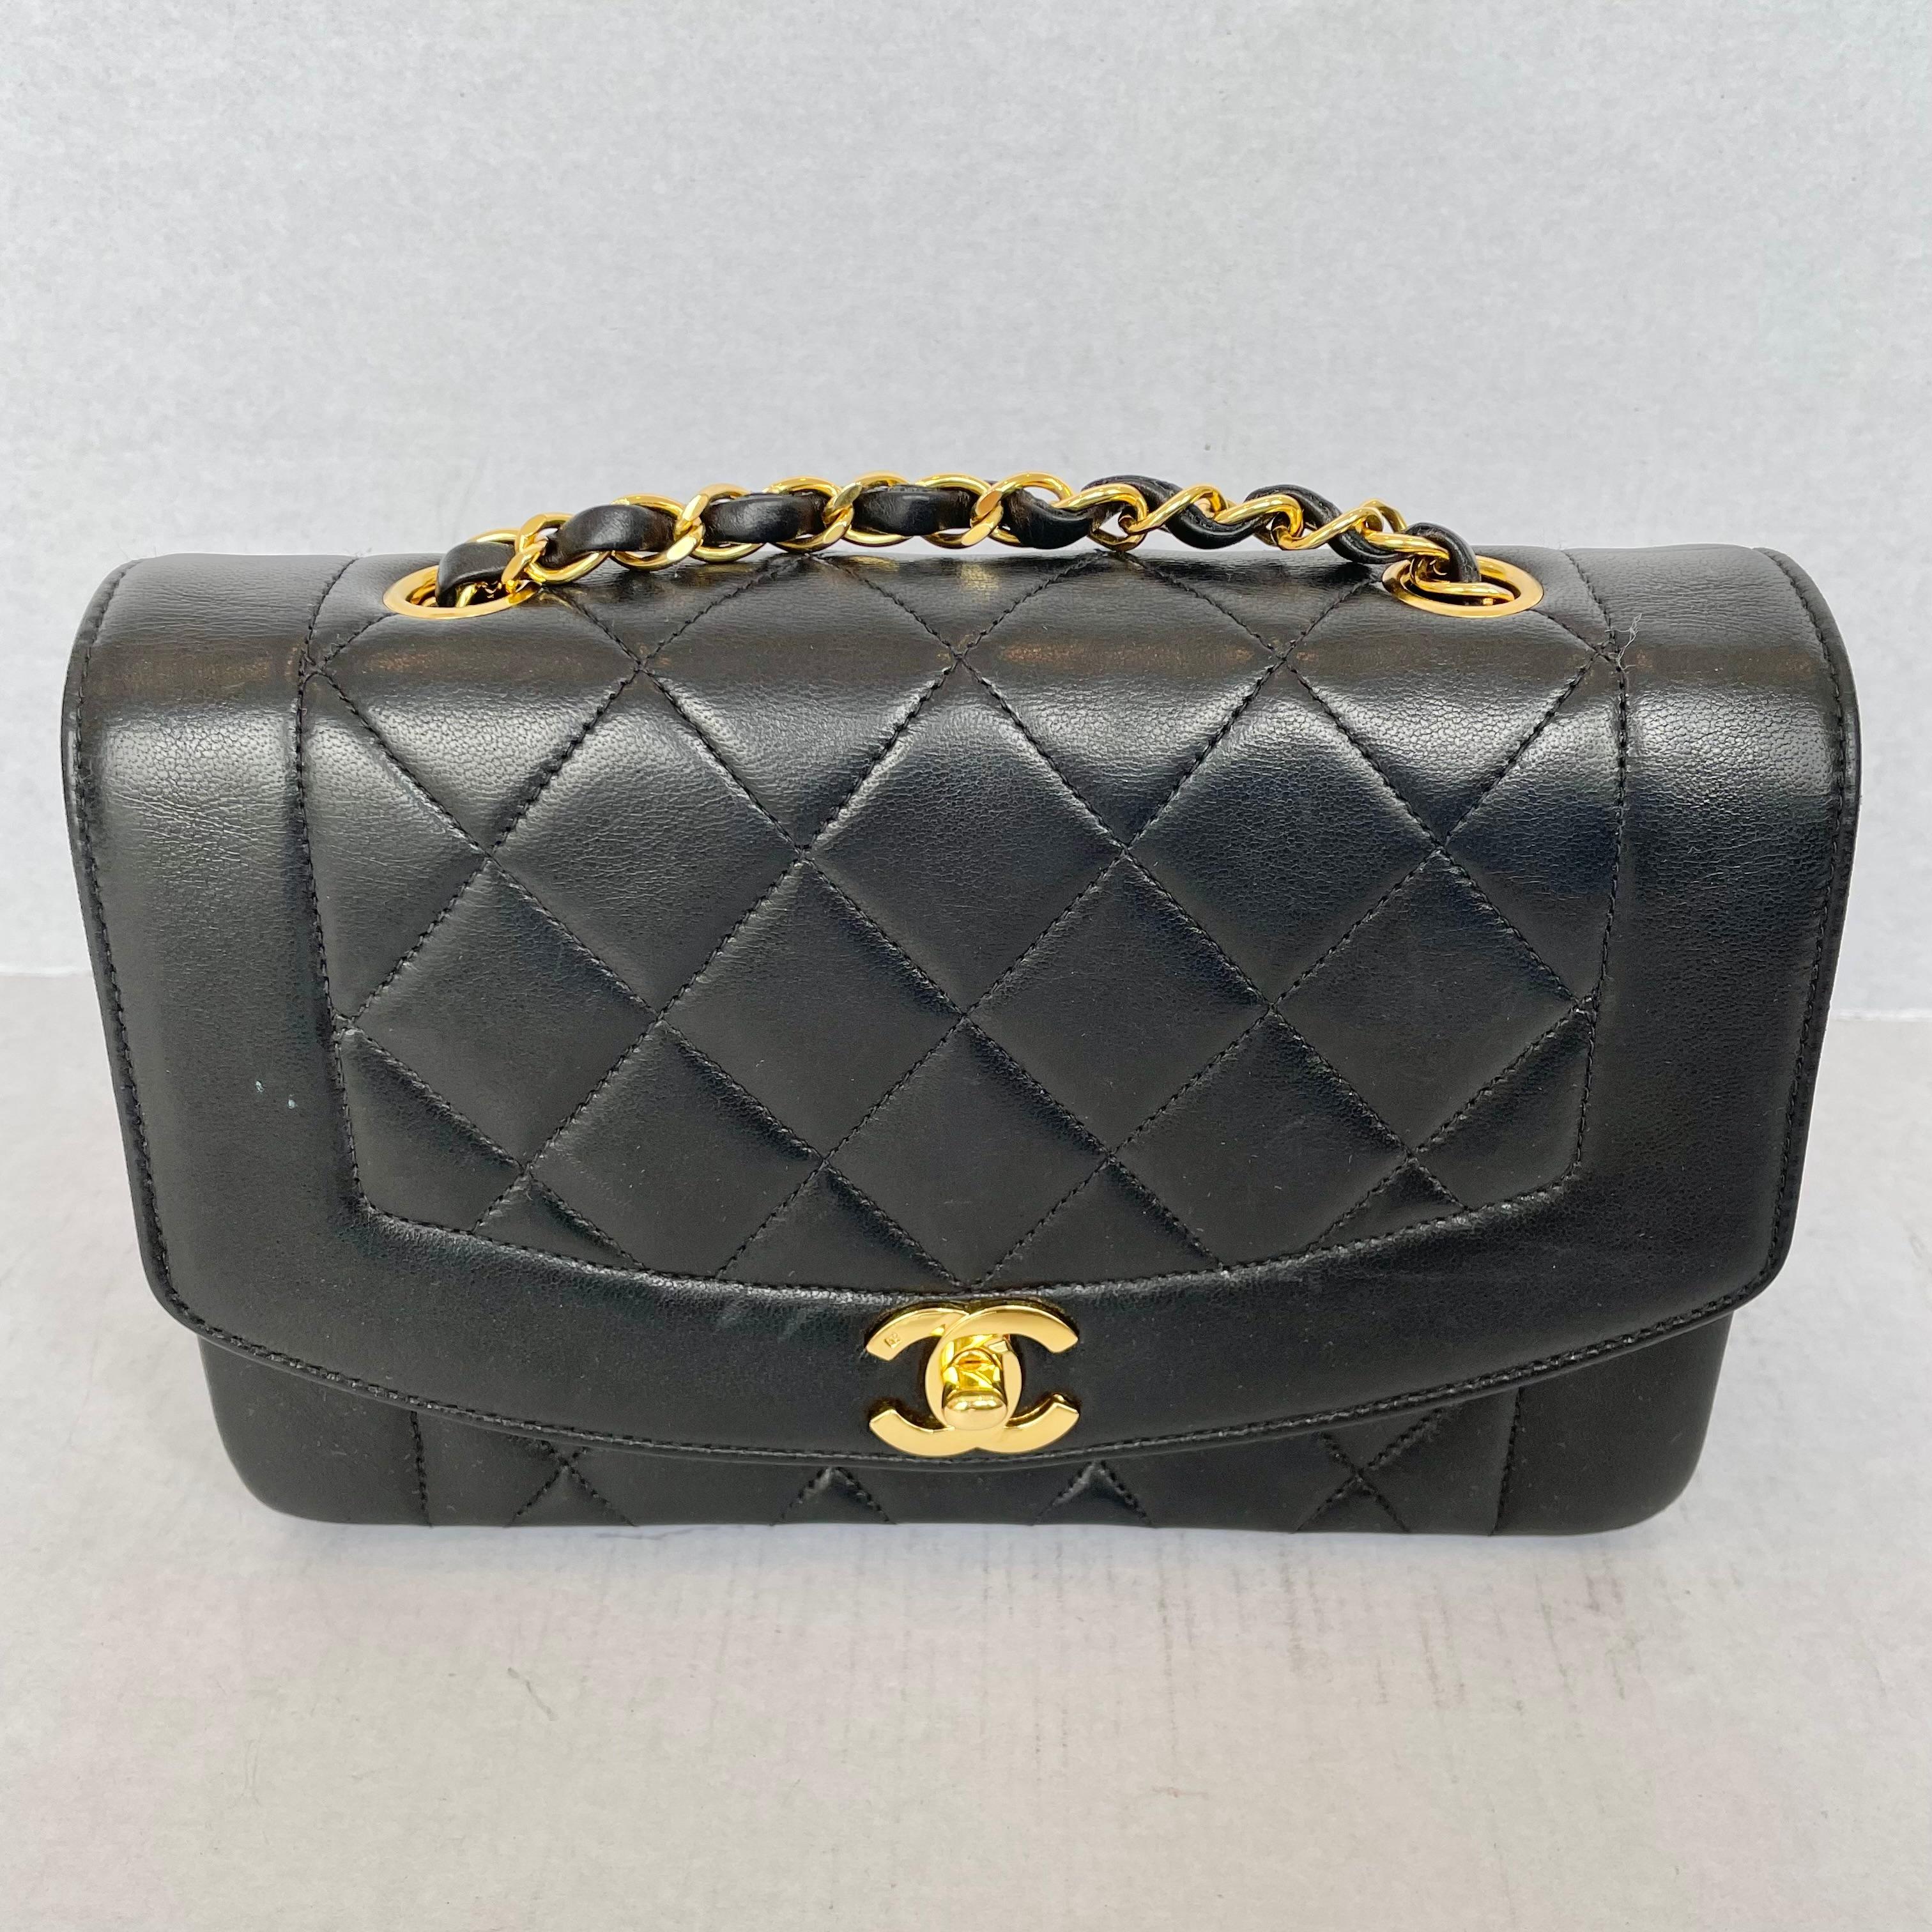 Classic Chanel Diana purse in a stunning black lambskin. This iconic bag features a quilted body with a bare trim around front flap to accentuate the quilted design on the rest of the body as well as the gold tone front clasp of the interlocking